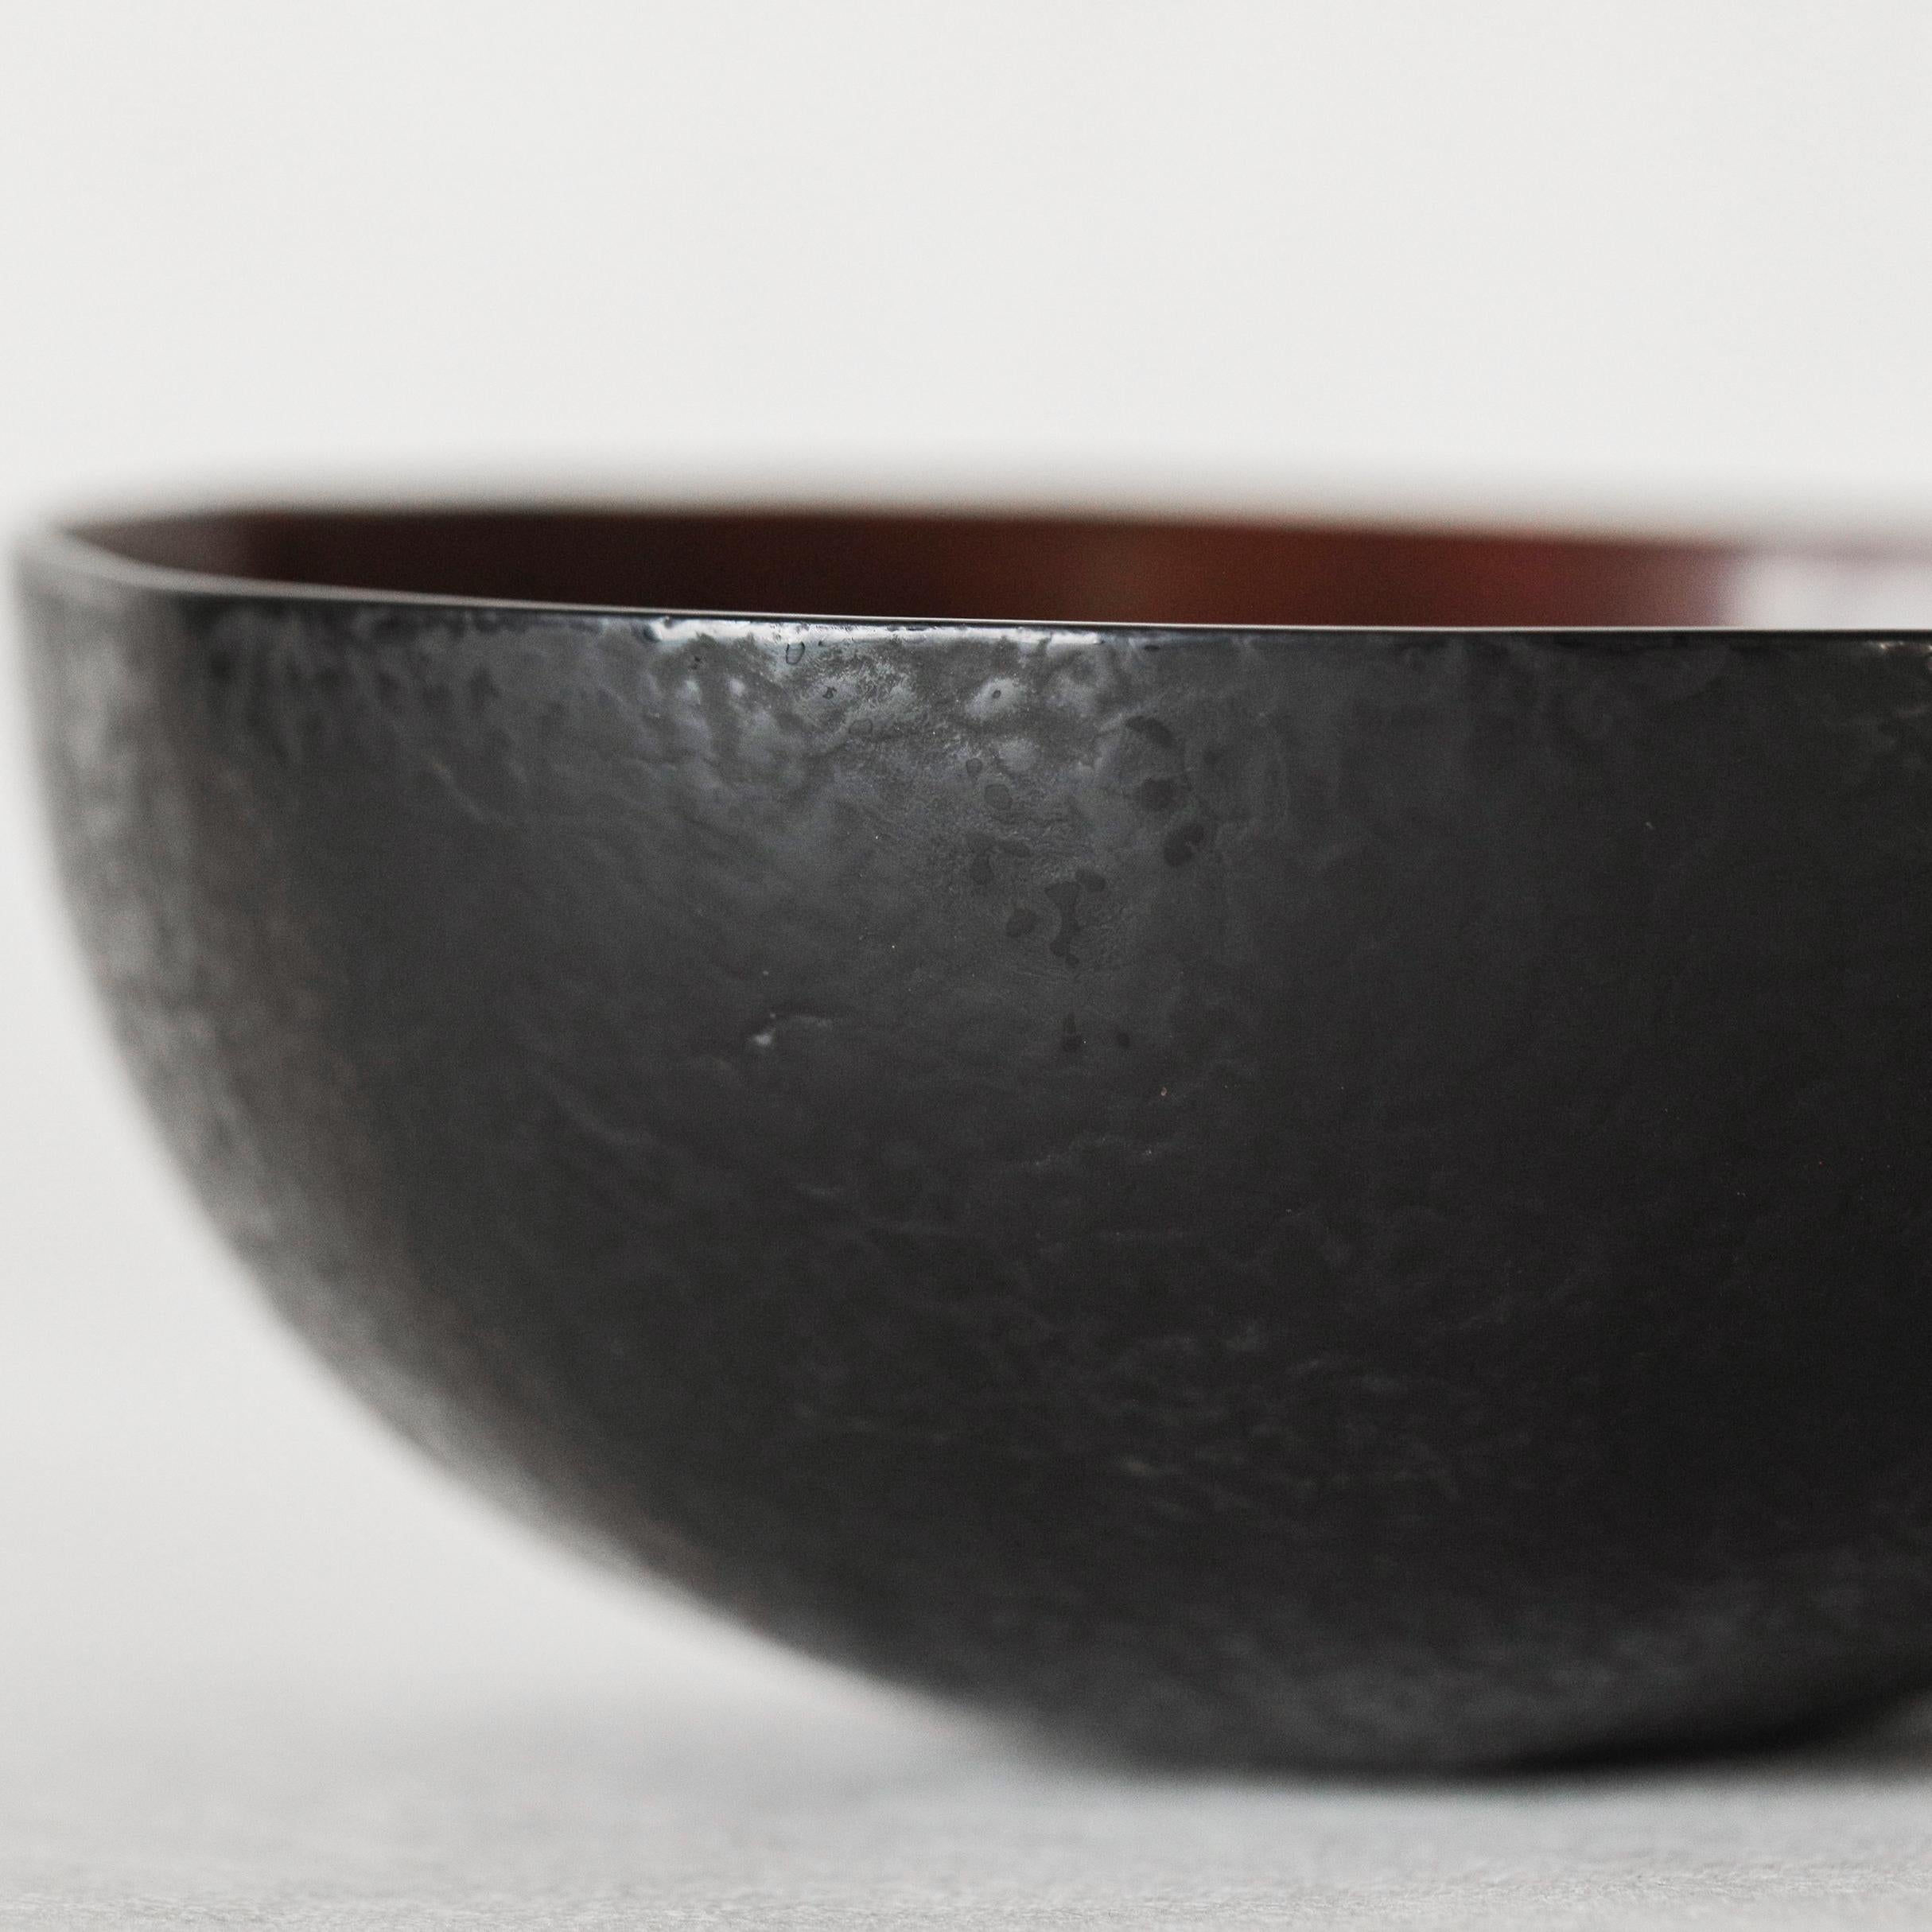 Thai Urushi Cinnabar Red & Black Lacquer Gourd Calaba Long Bowl by Alexander Lamont For Sale